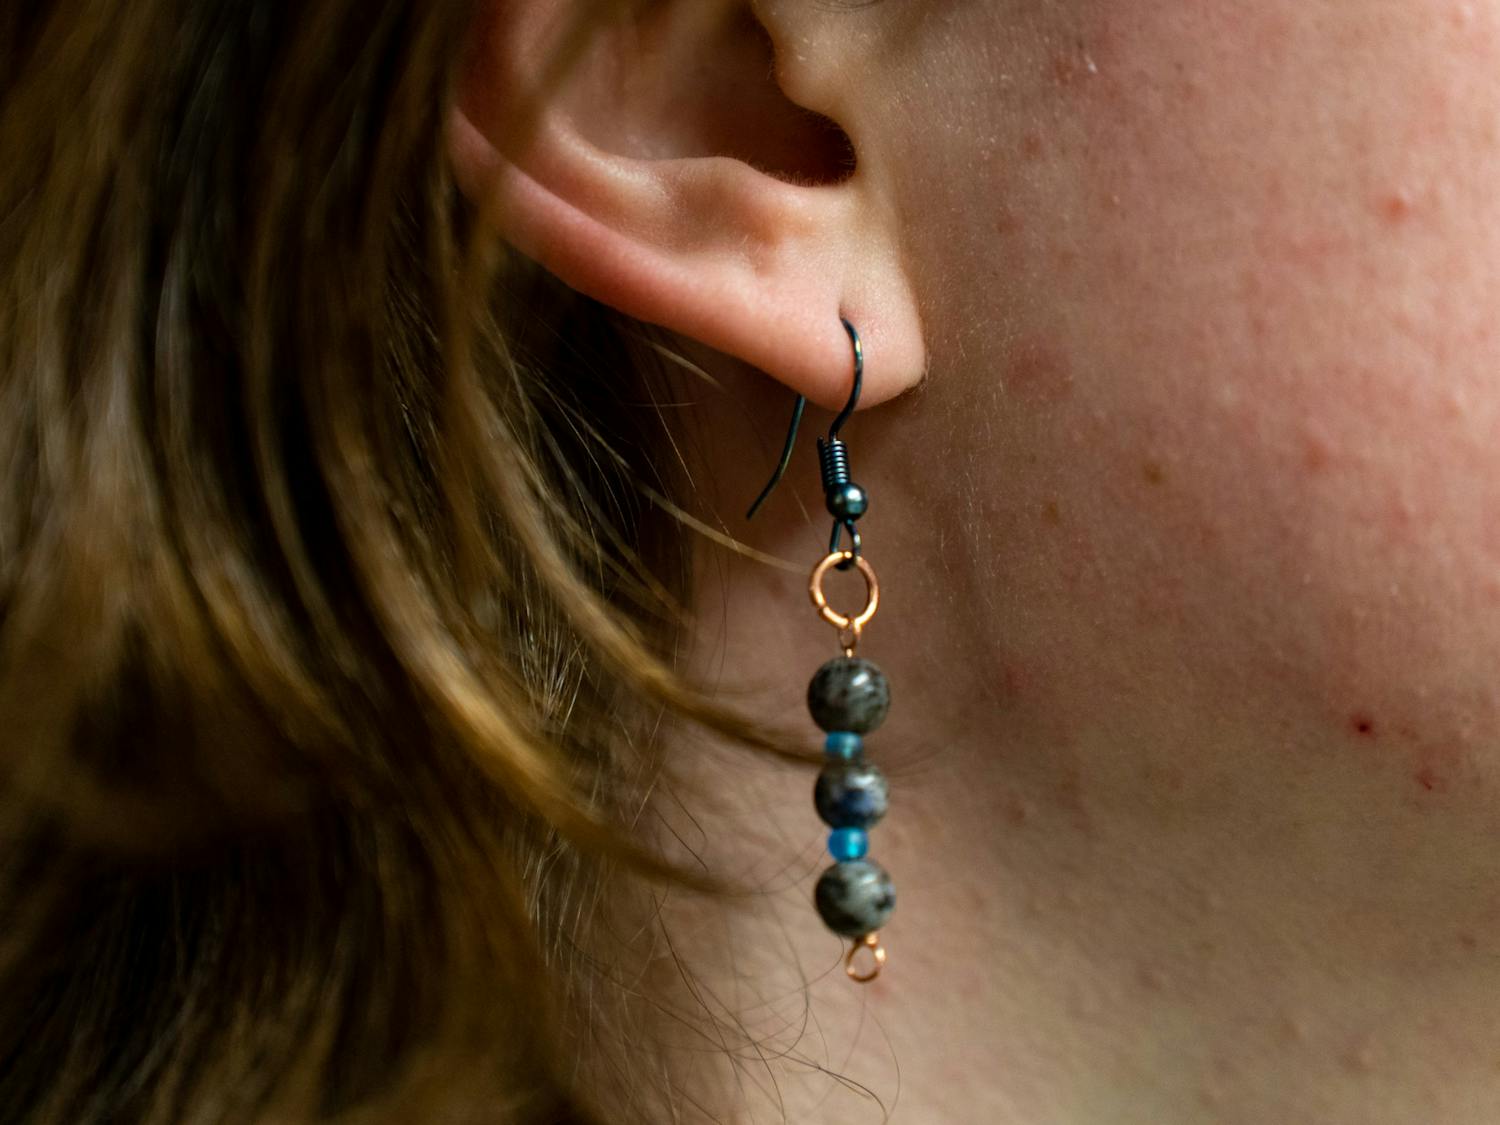 DTH Photo Illustration. A UNC student wears an earring in his ear.